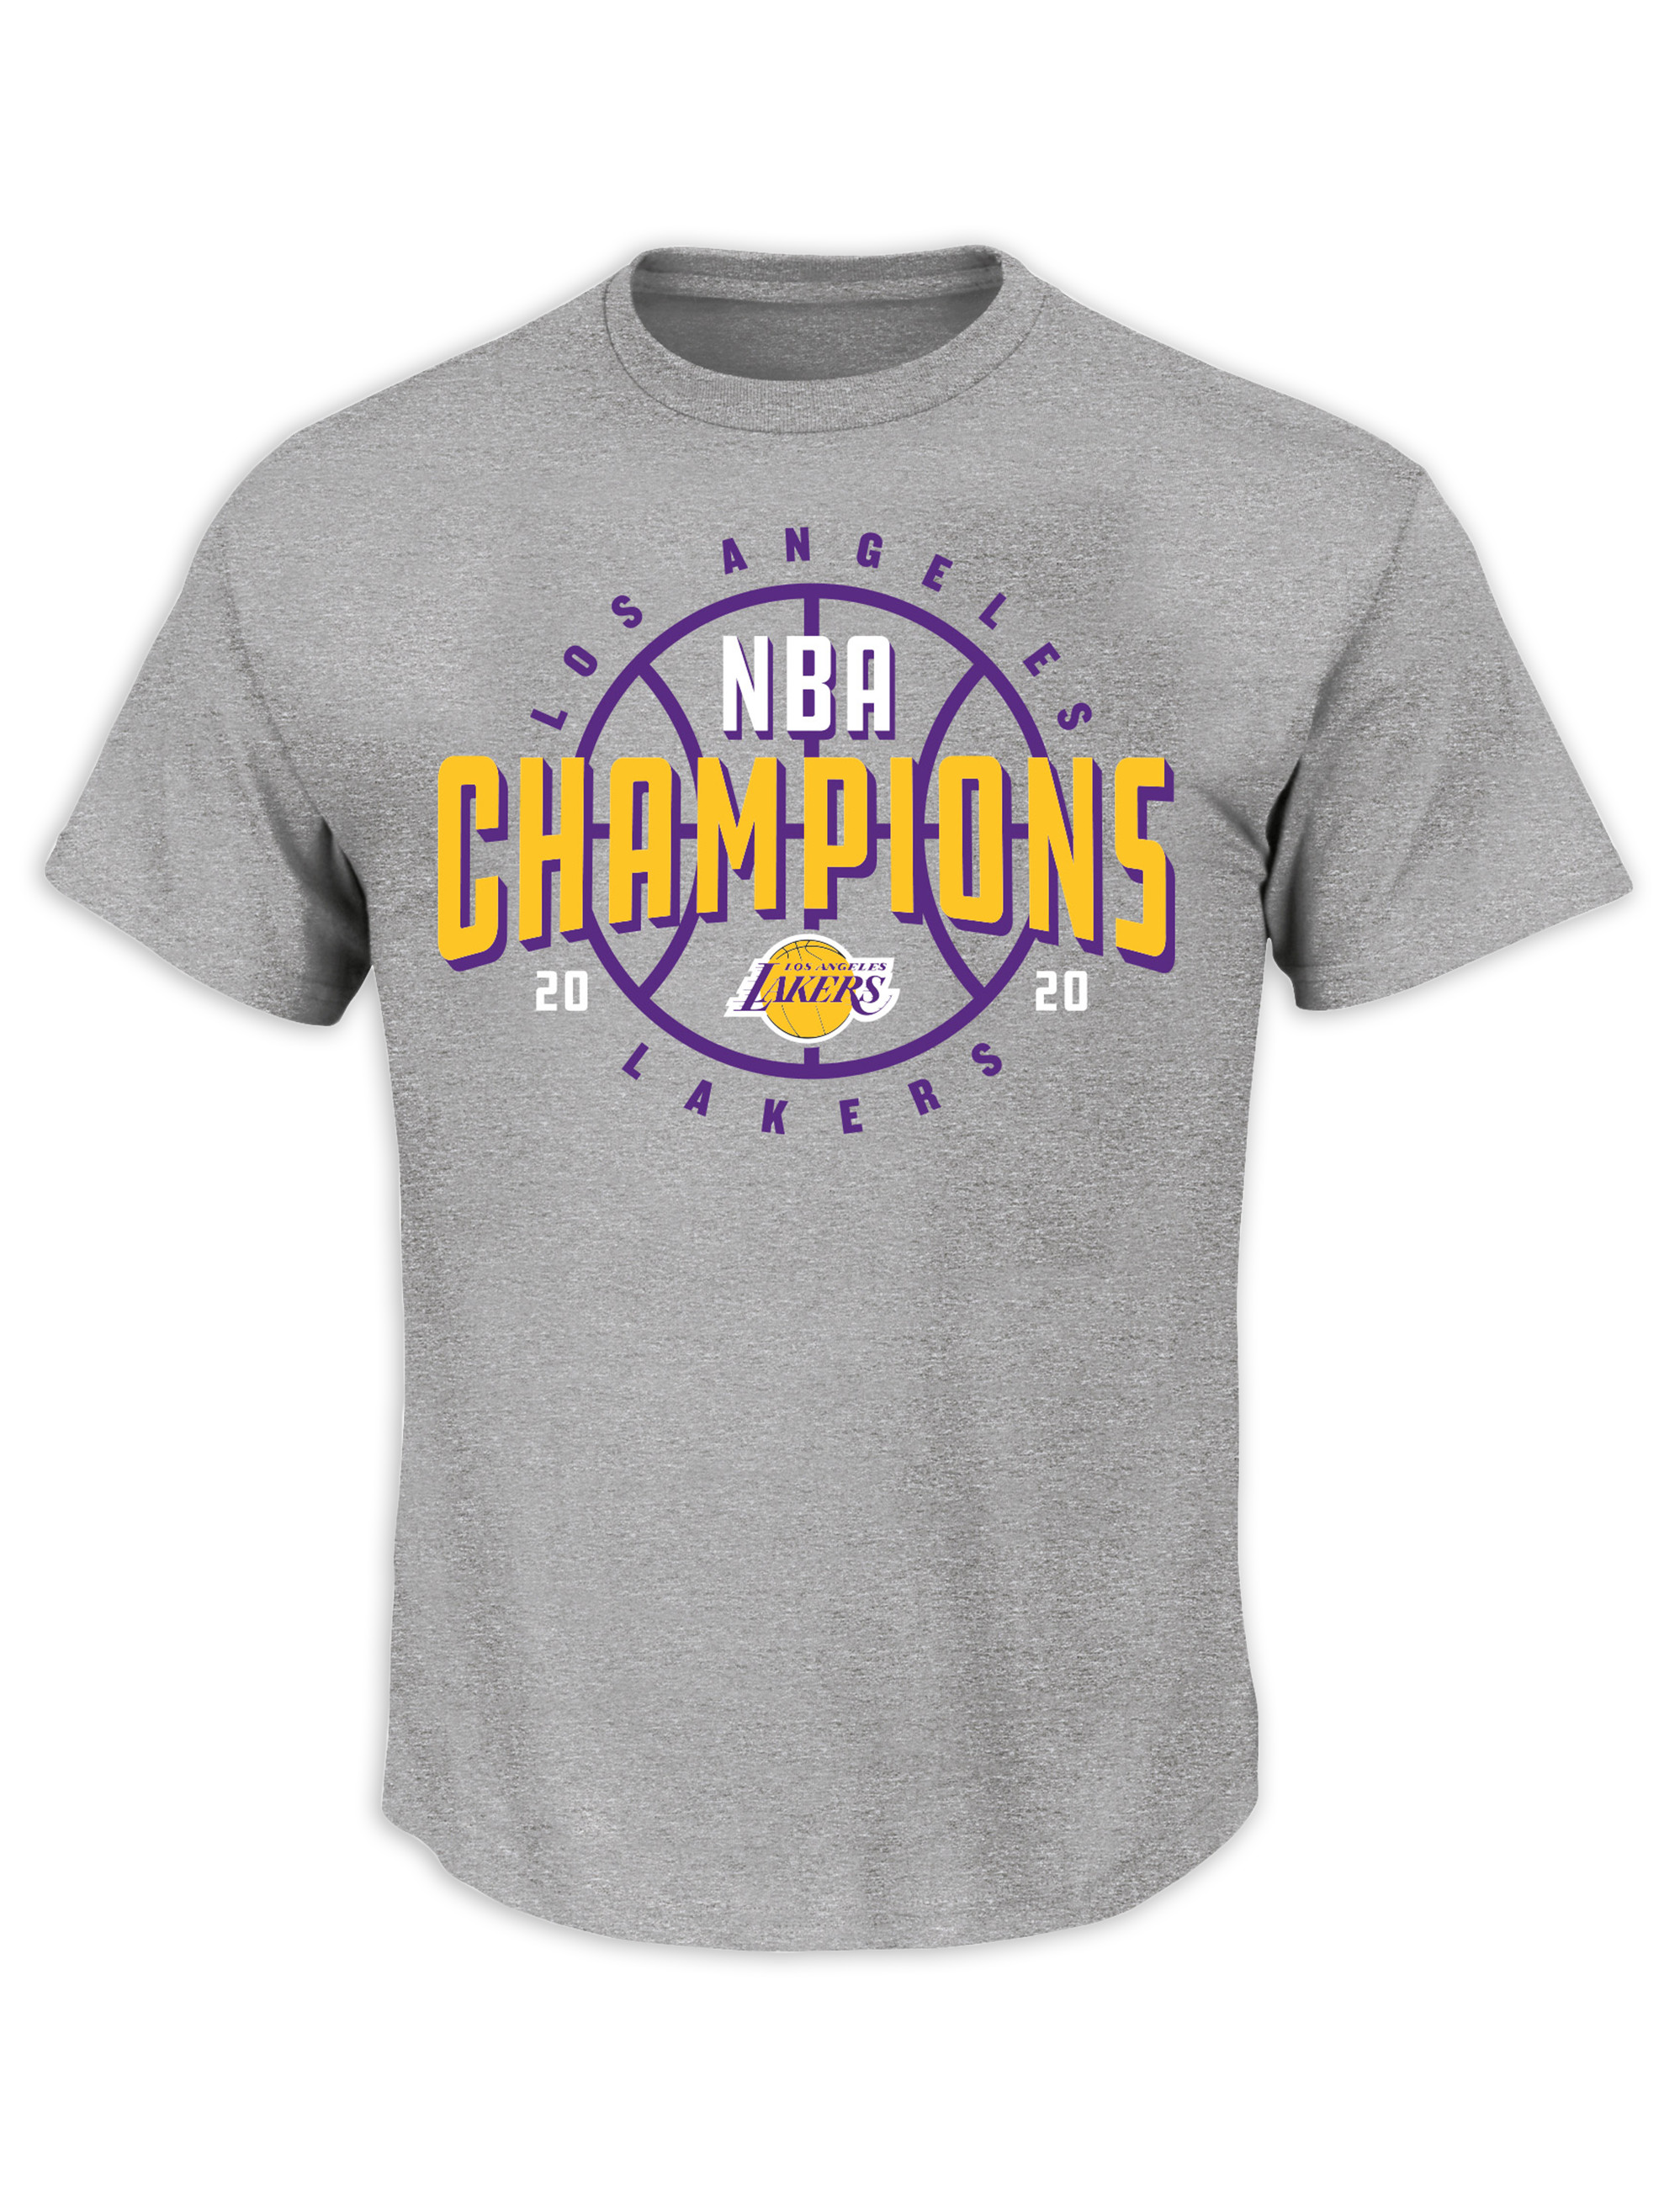 Where to Buy Lakers Championship 2020 Shirt, Hat and Other Gear After NBA  Title Win